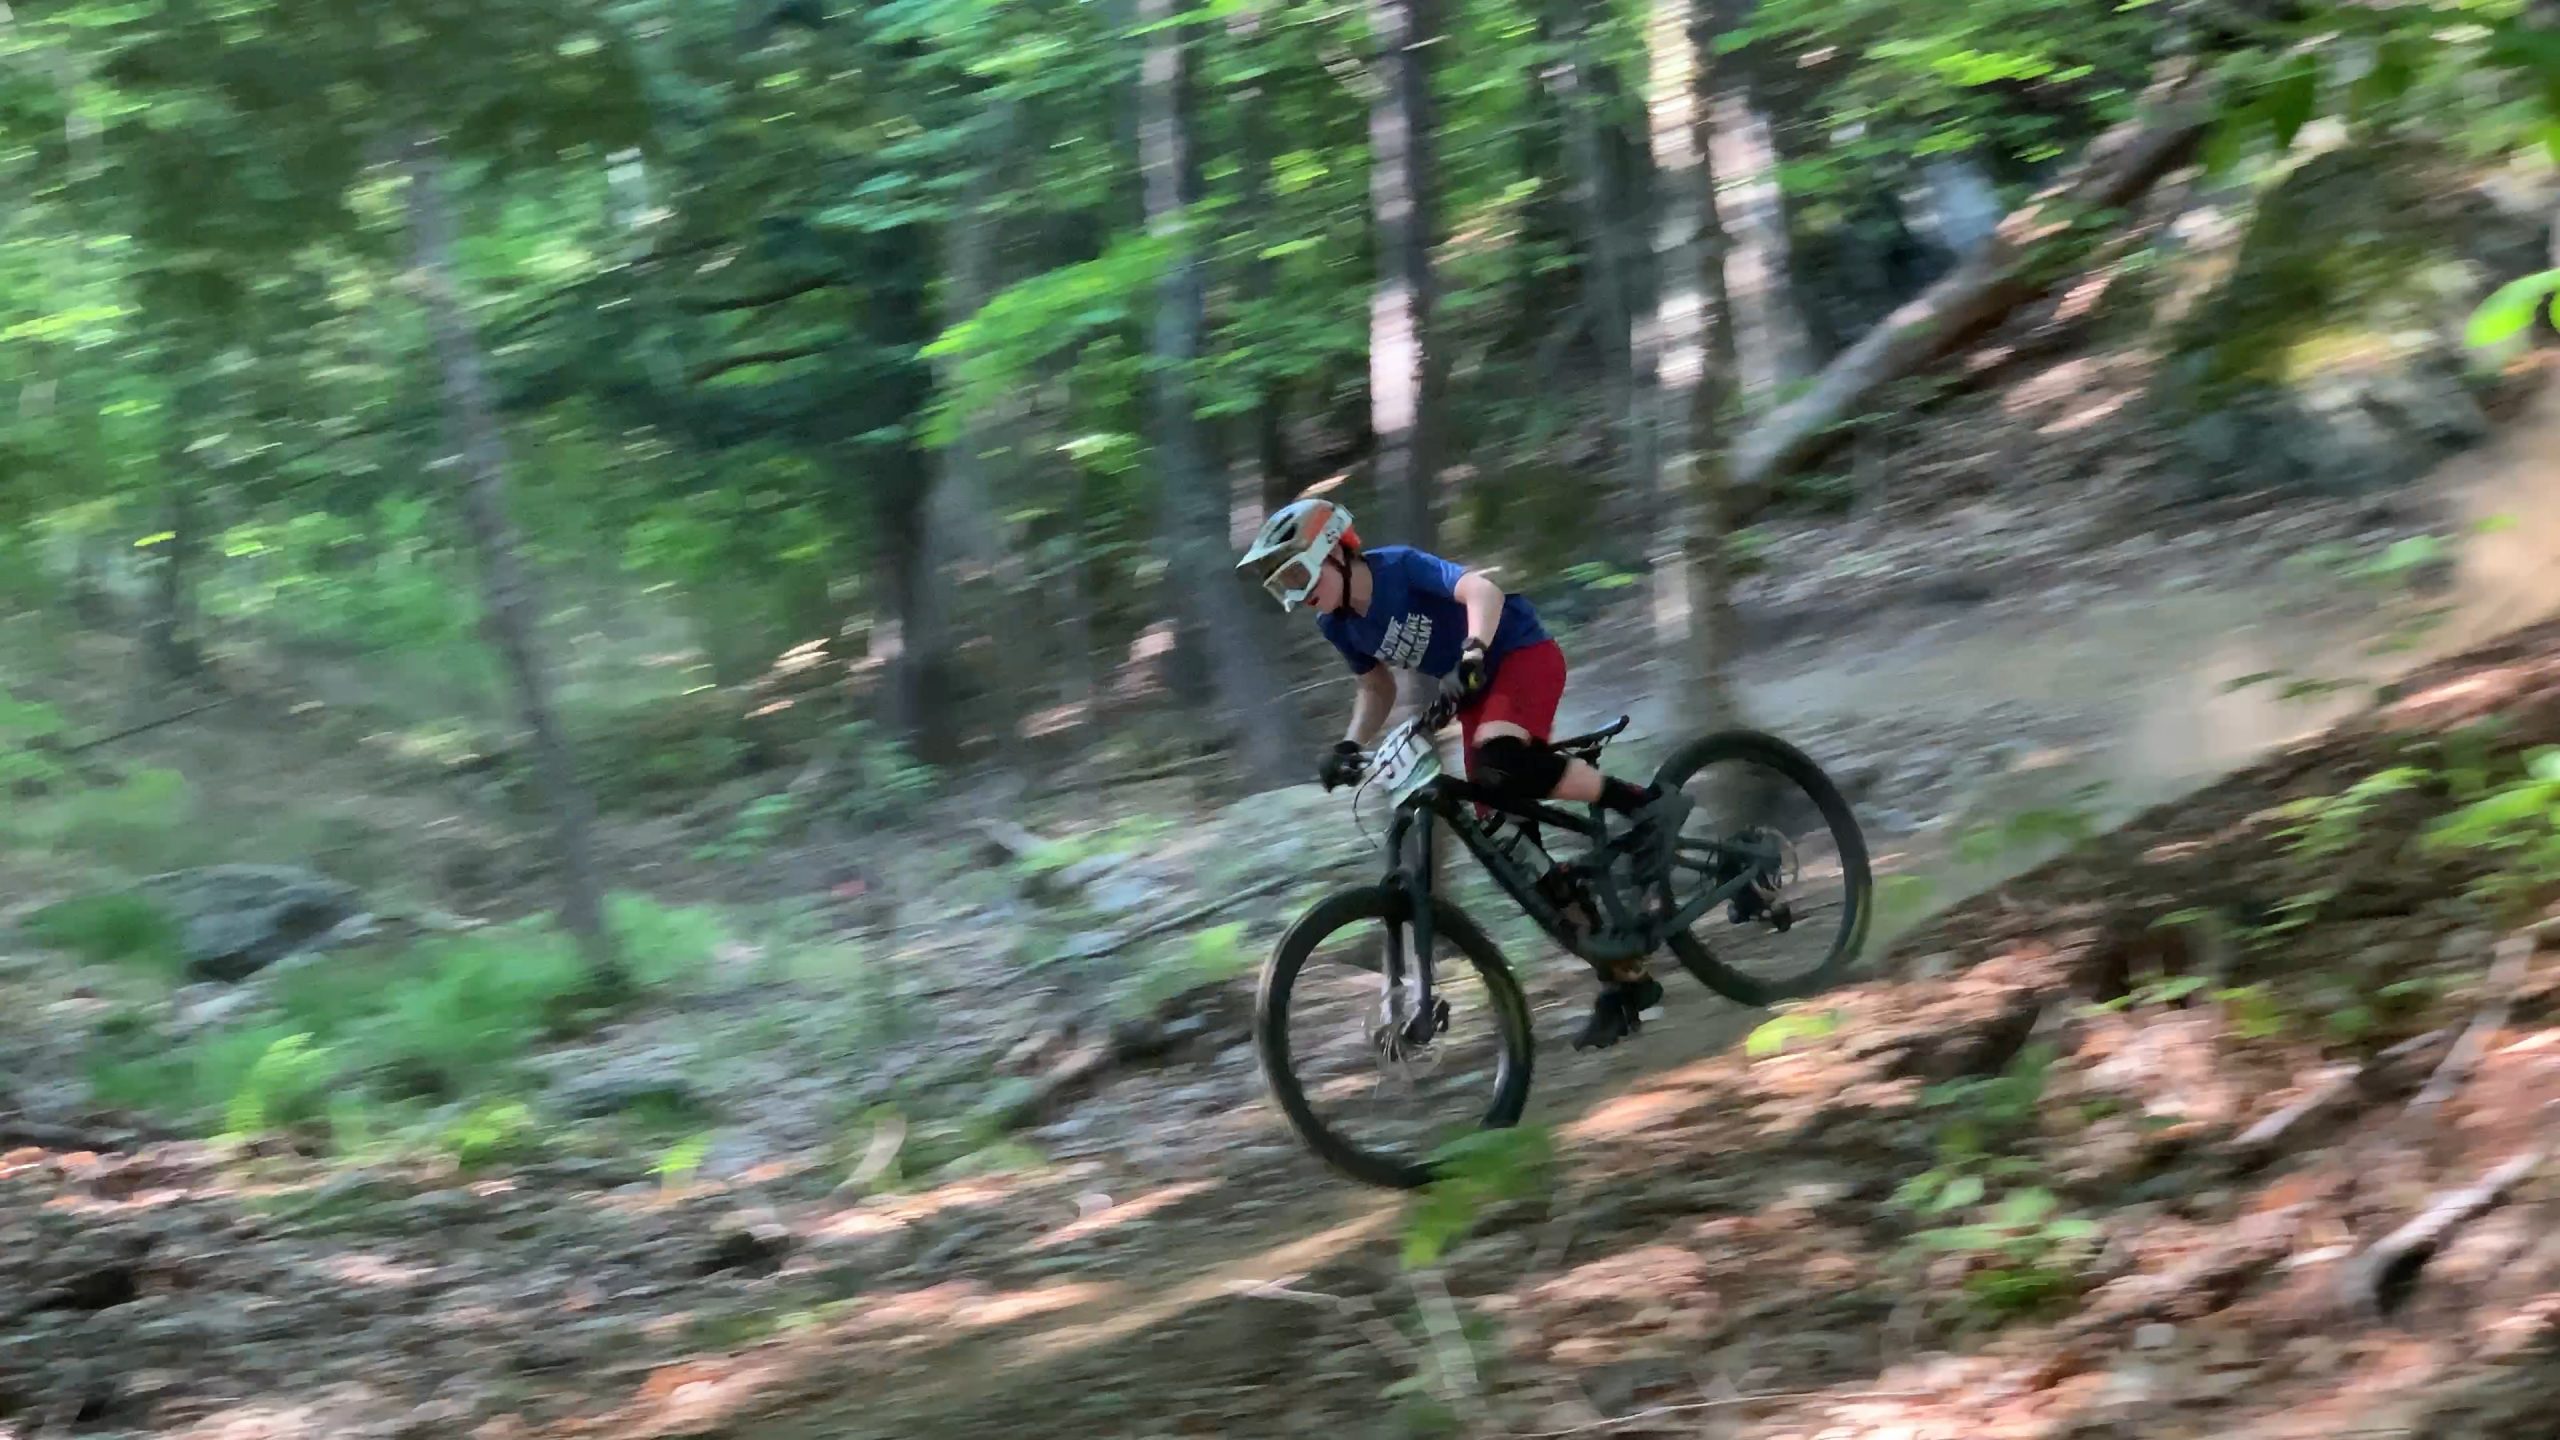 Mountain biker on the trails at Sleepy Hollow.